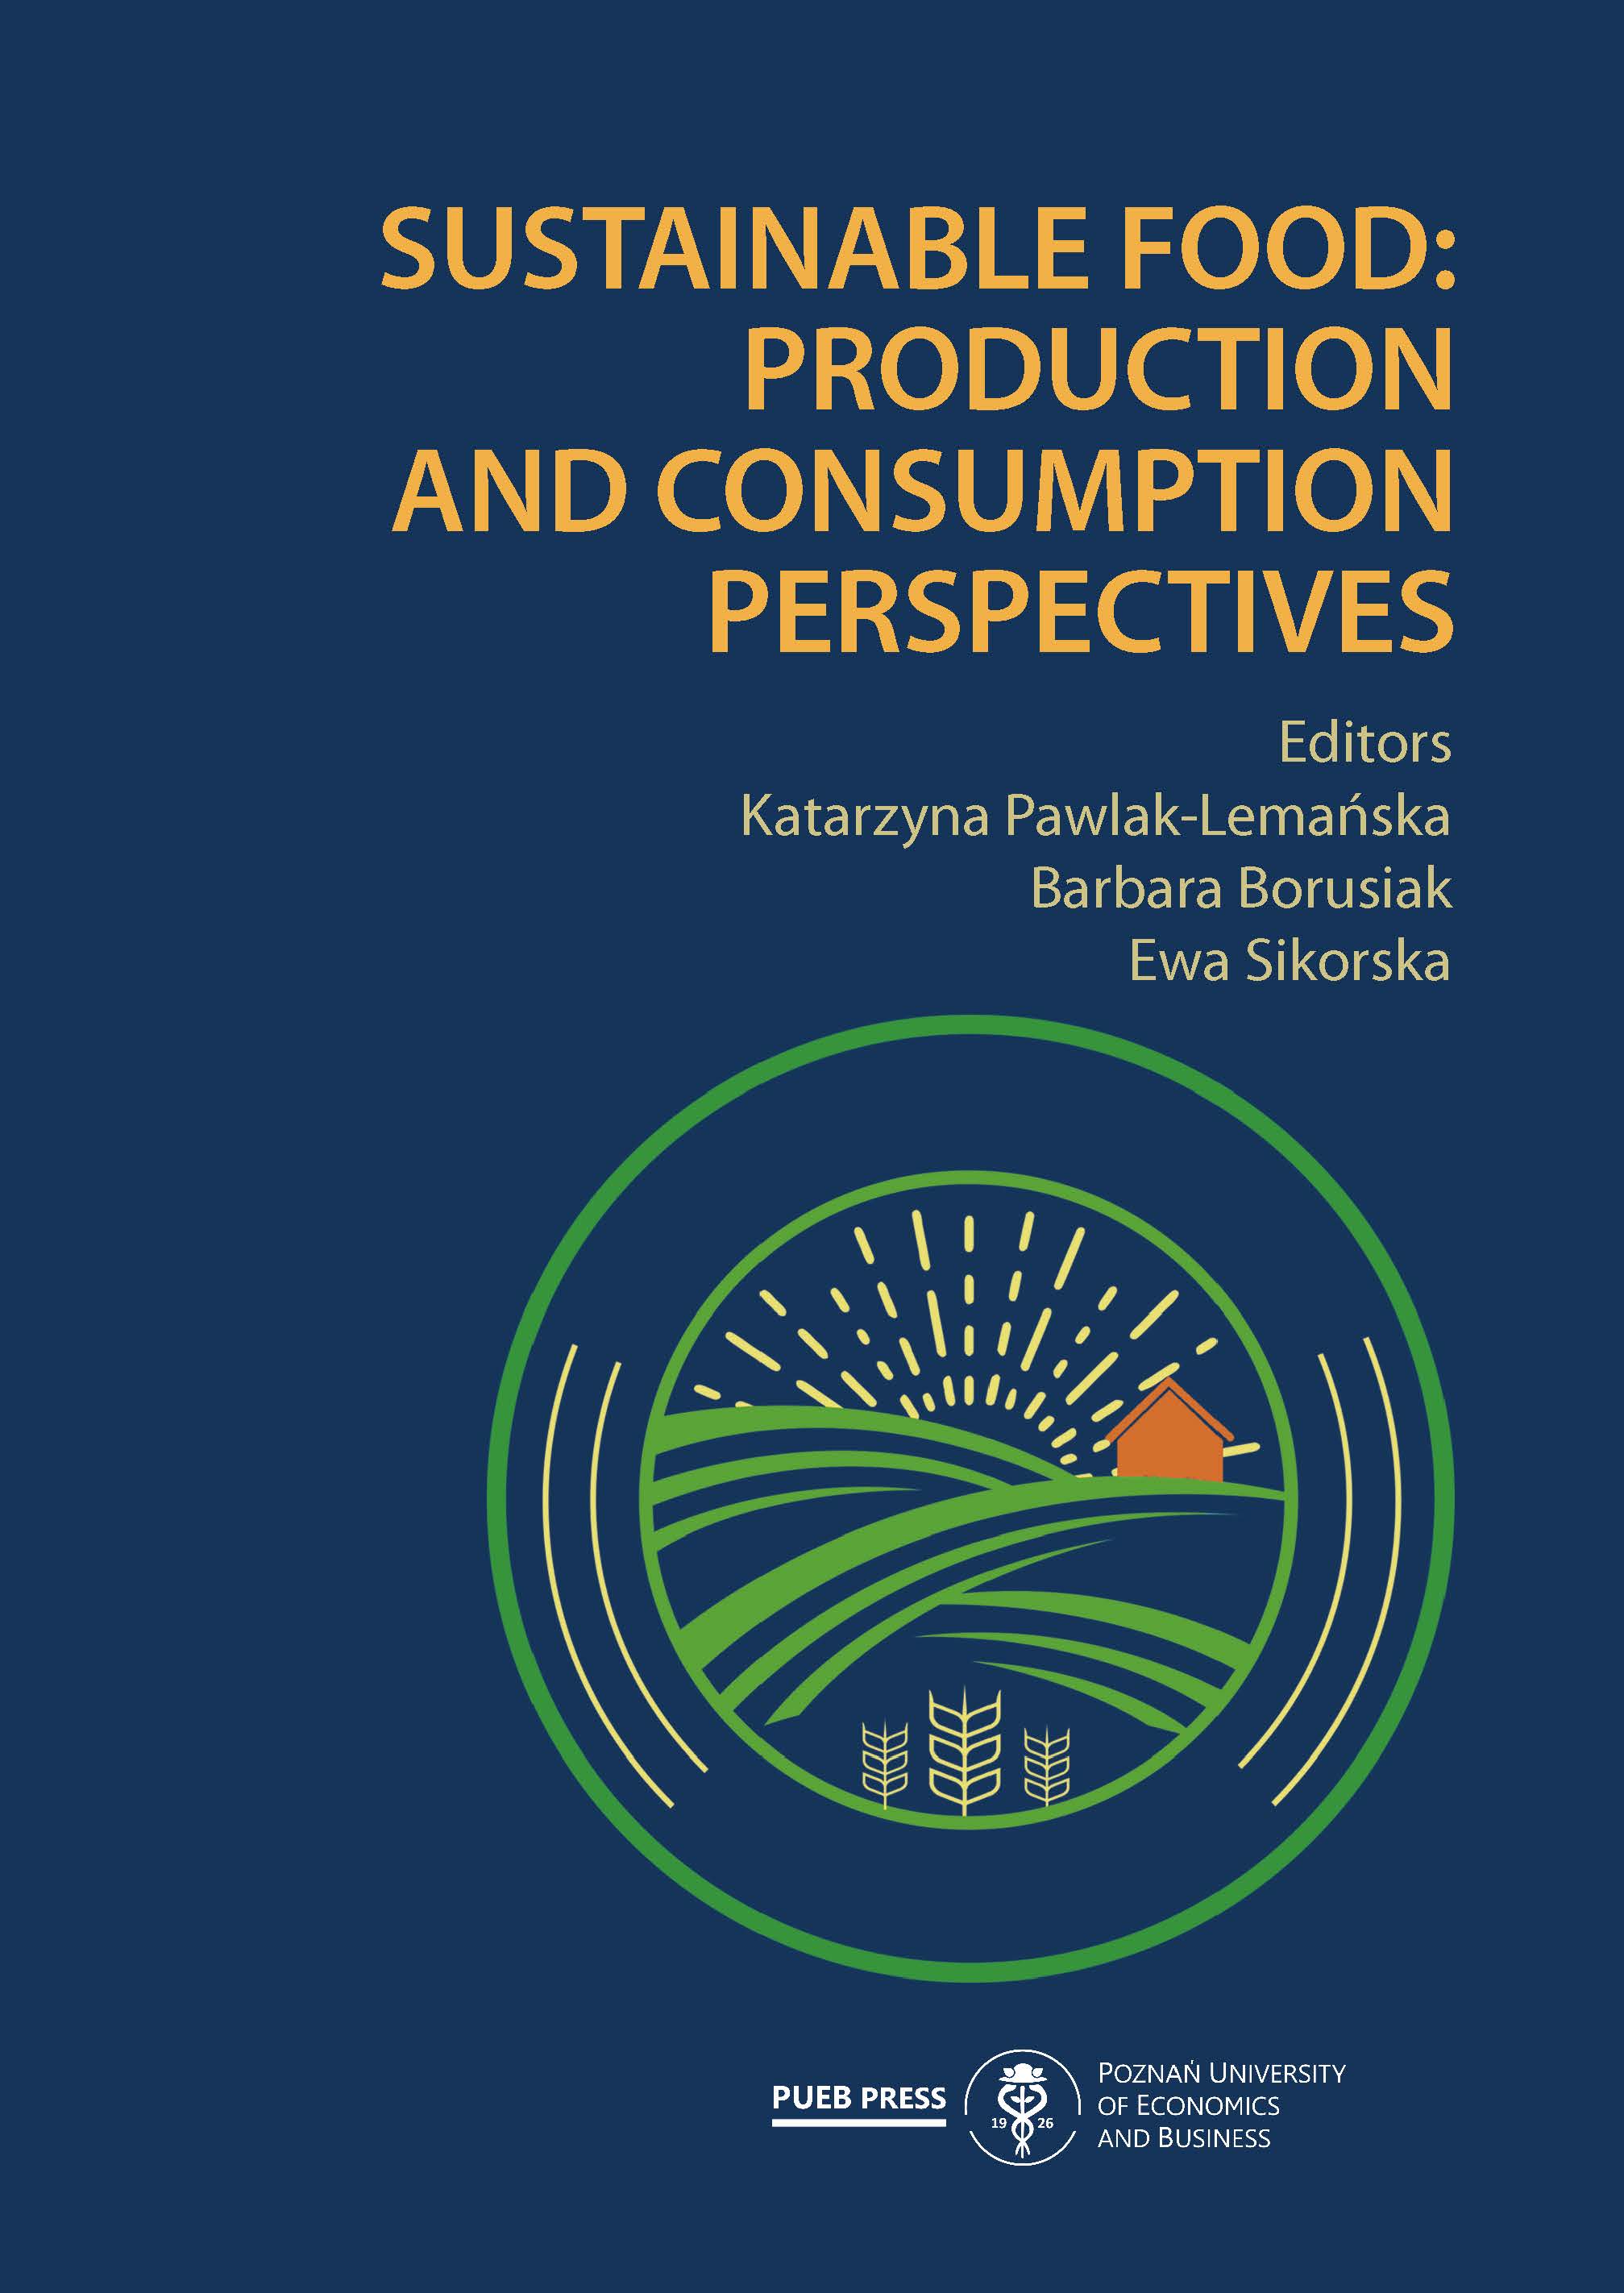 Shaping sustainable food consumption attitudes: Bibliometric literature review